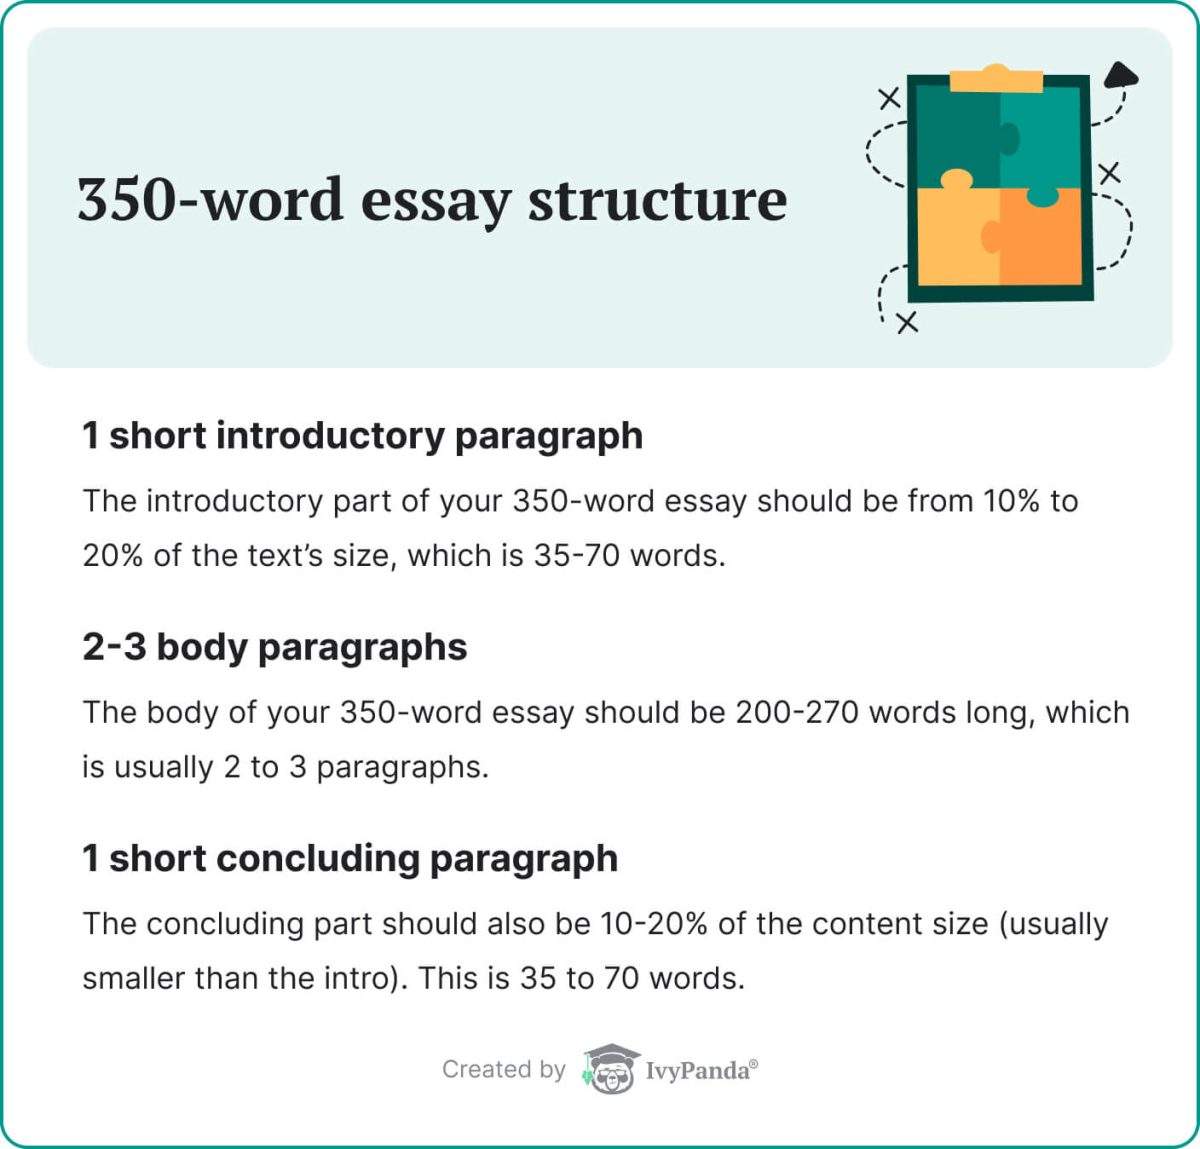 The picture describes a 350-word essay structure.